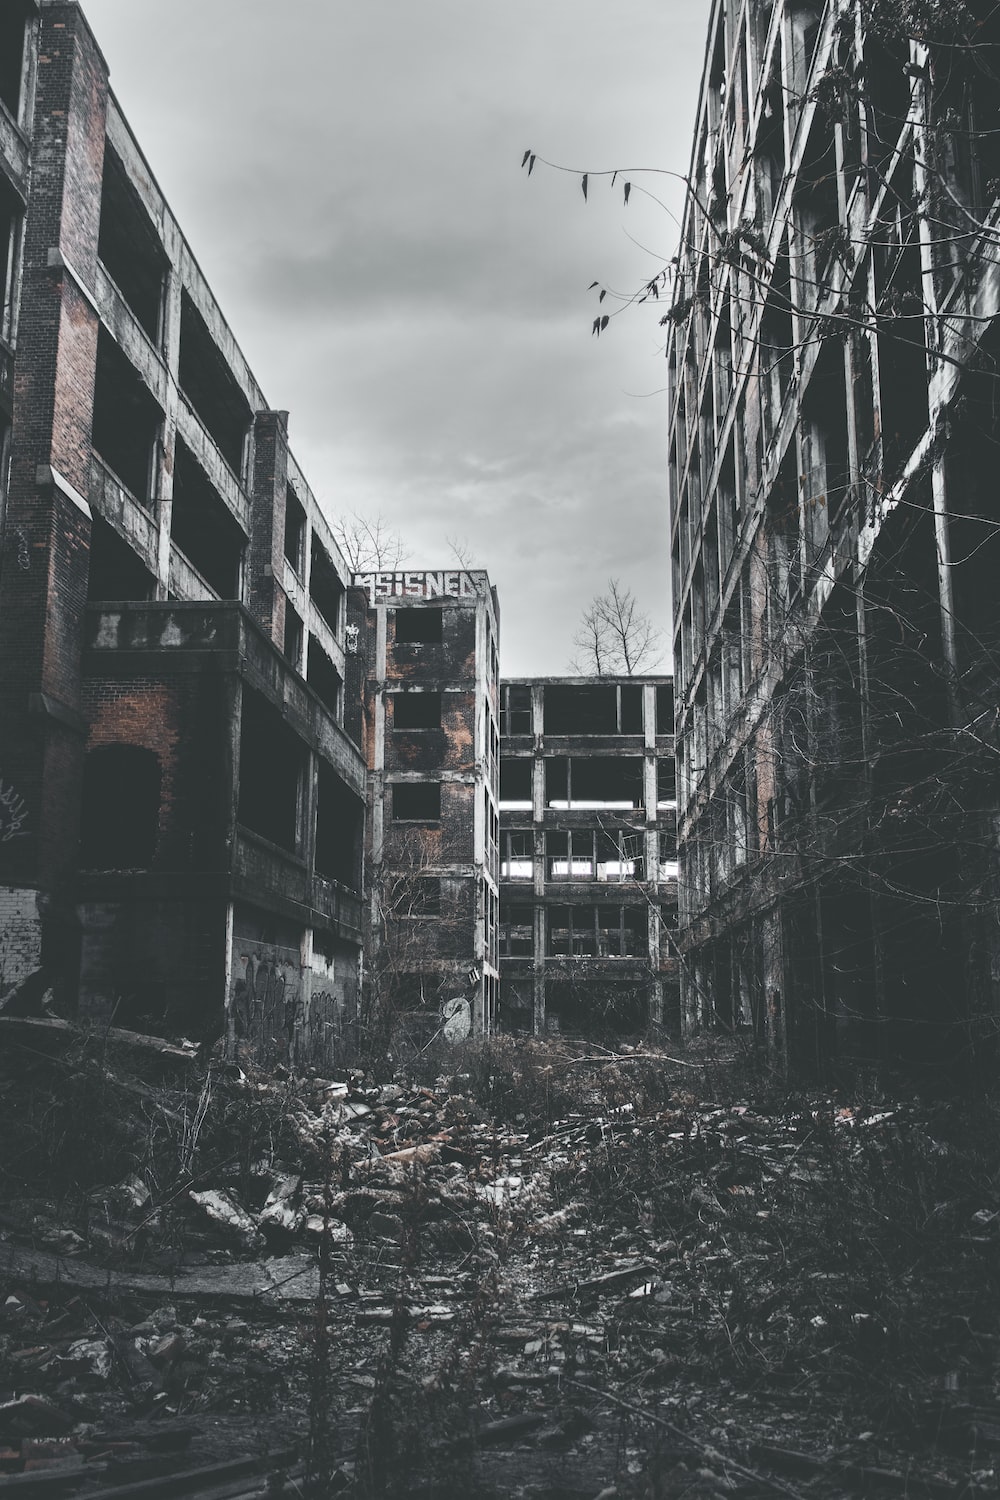 Abandoned City Picture. Download Free Image